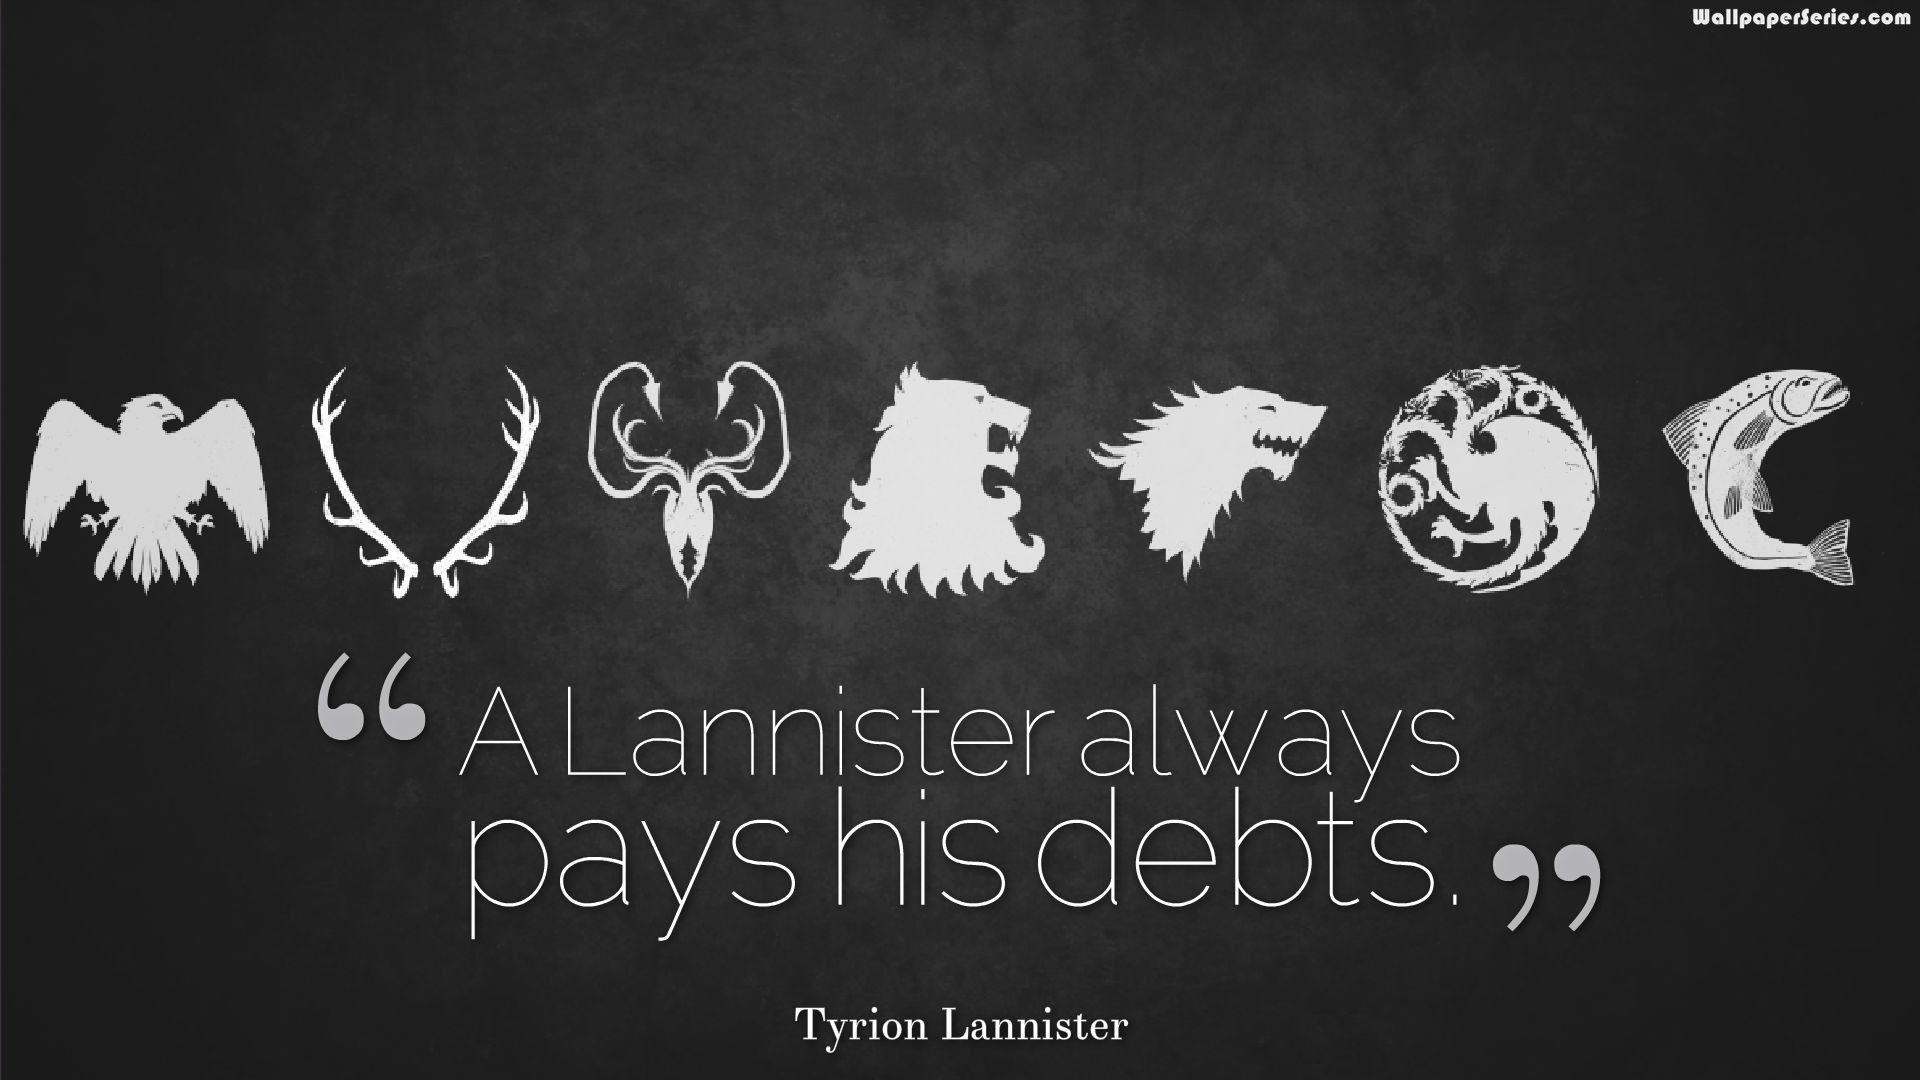 Game Of Thrones Tyrion Lannister Quotes Wallpaper 10634